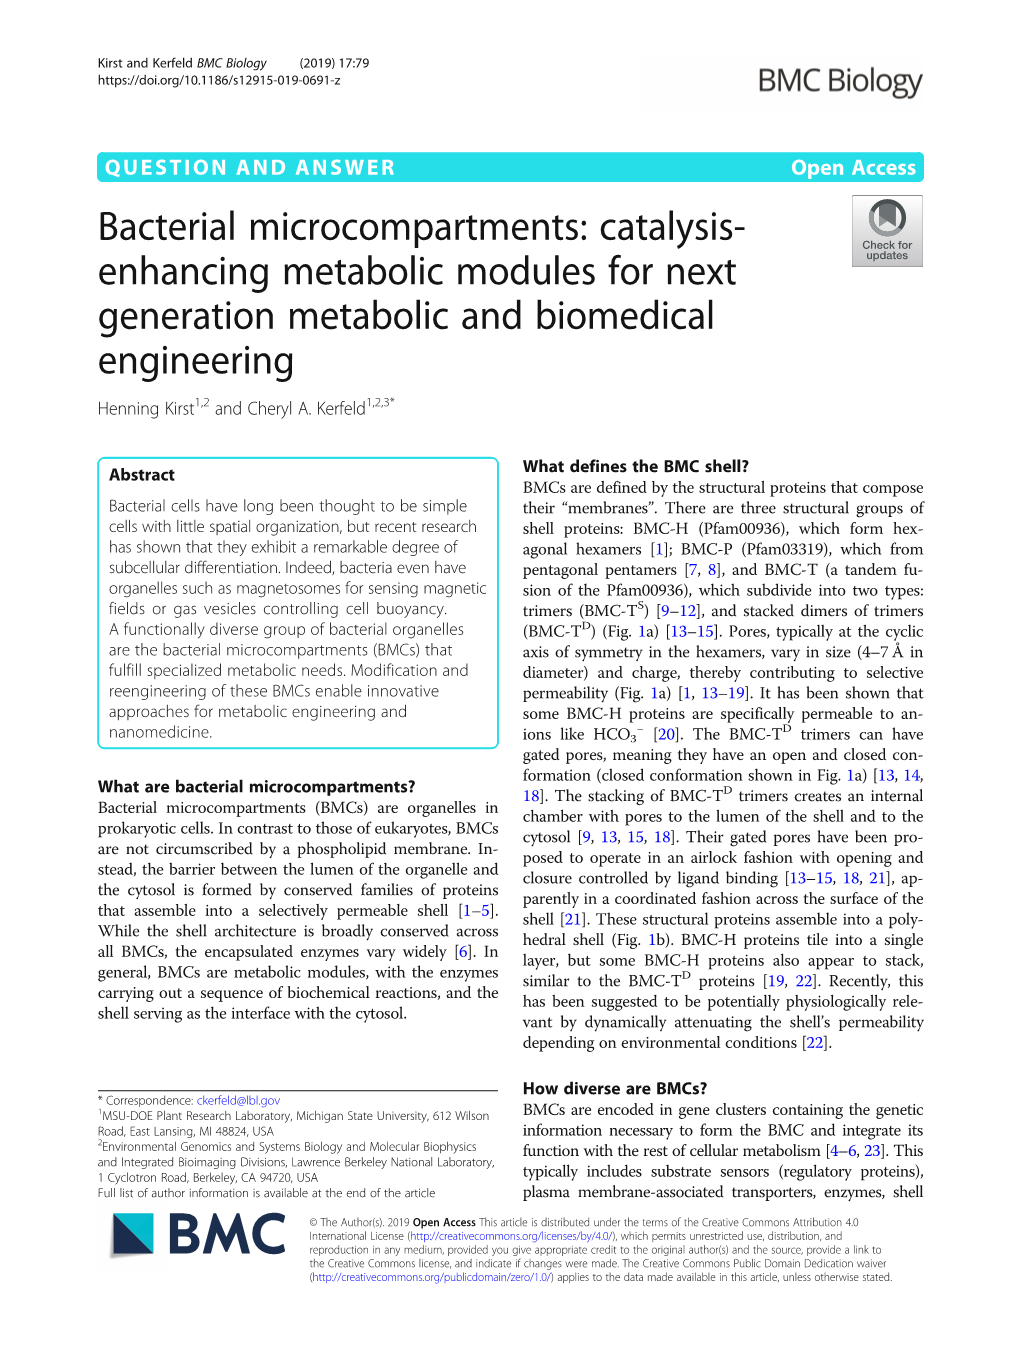 Bacterial Microcompartments: Catalysis- Enhancing Metabolic Modules for Next Generation Metabolic and Biomedical Engineering Henning Kirst1,2 and Cheryl A